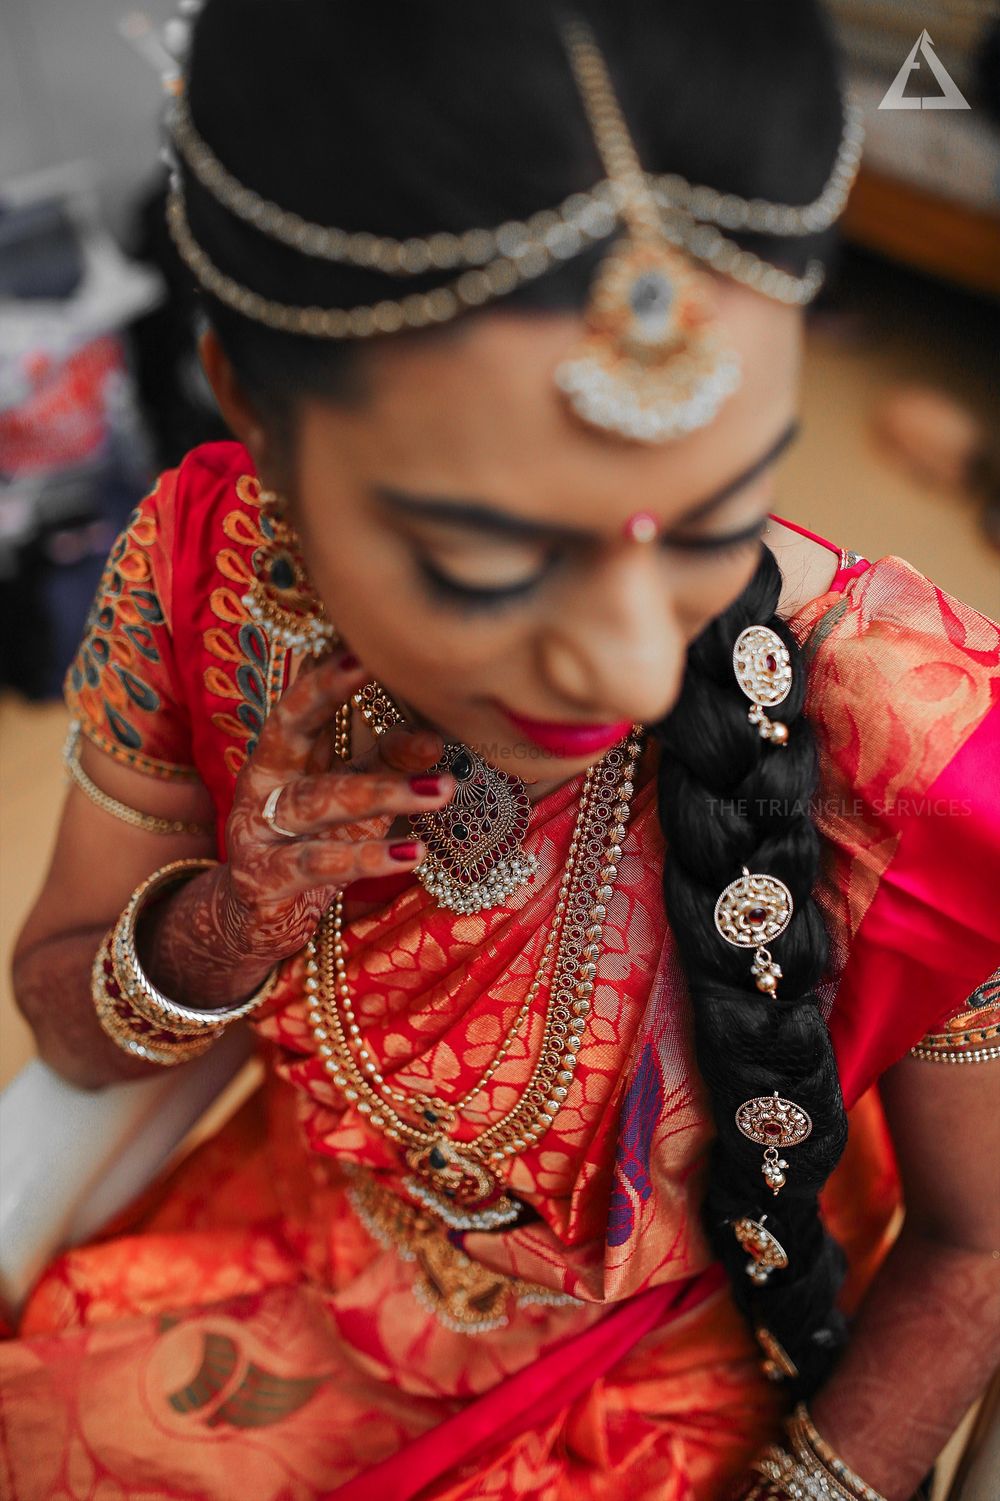 Photo From Suresh + Sreenithi - By Triangle Services Photography